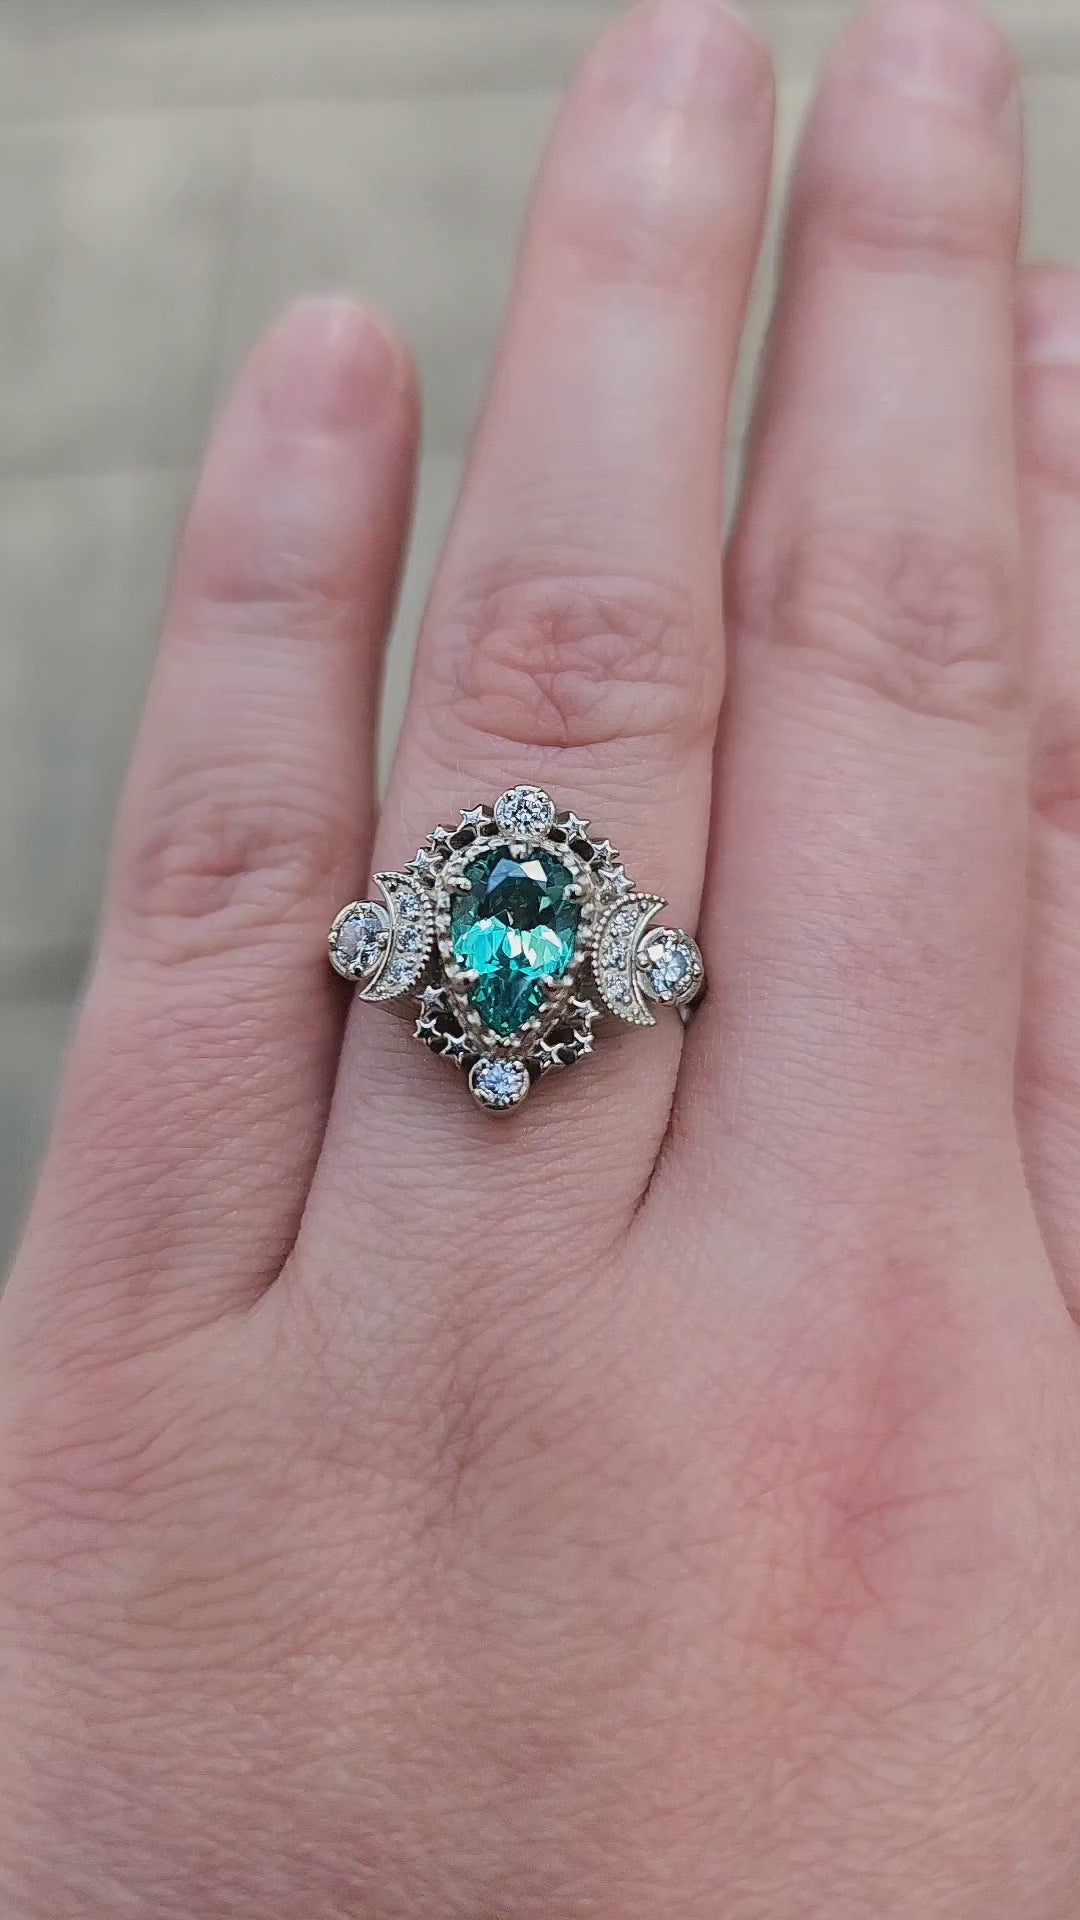 Pear Cosmos Moon Ring with Chatham Alexandrite and Diamonds - Star